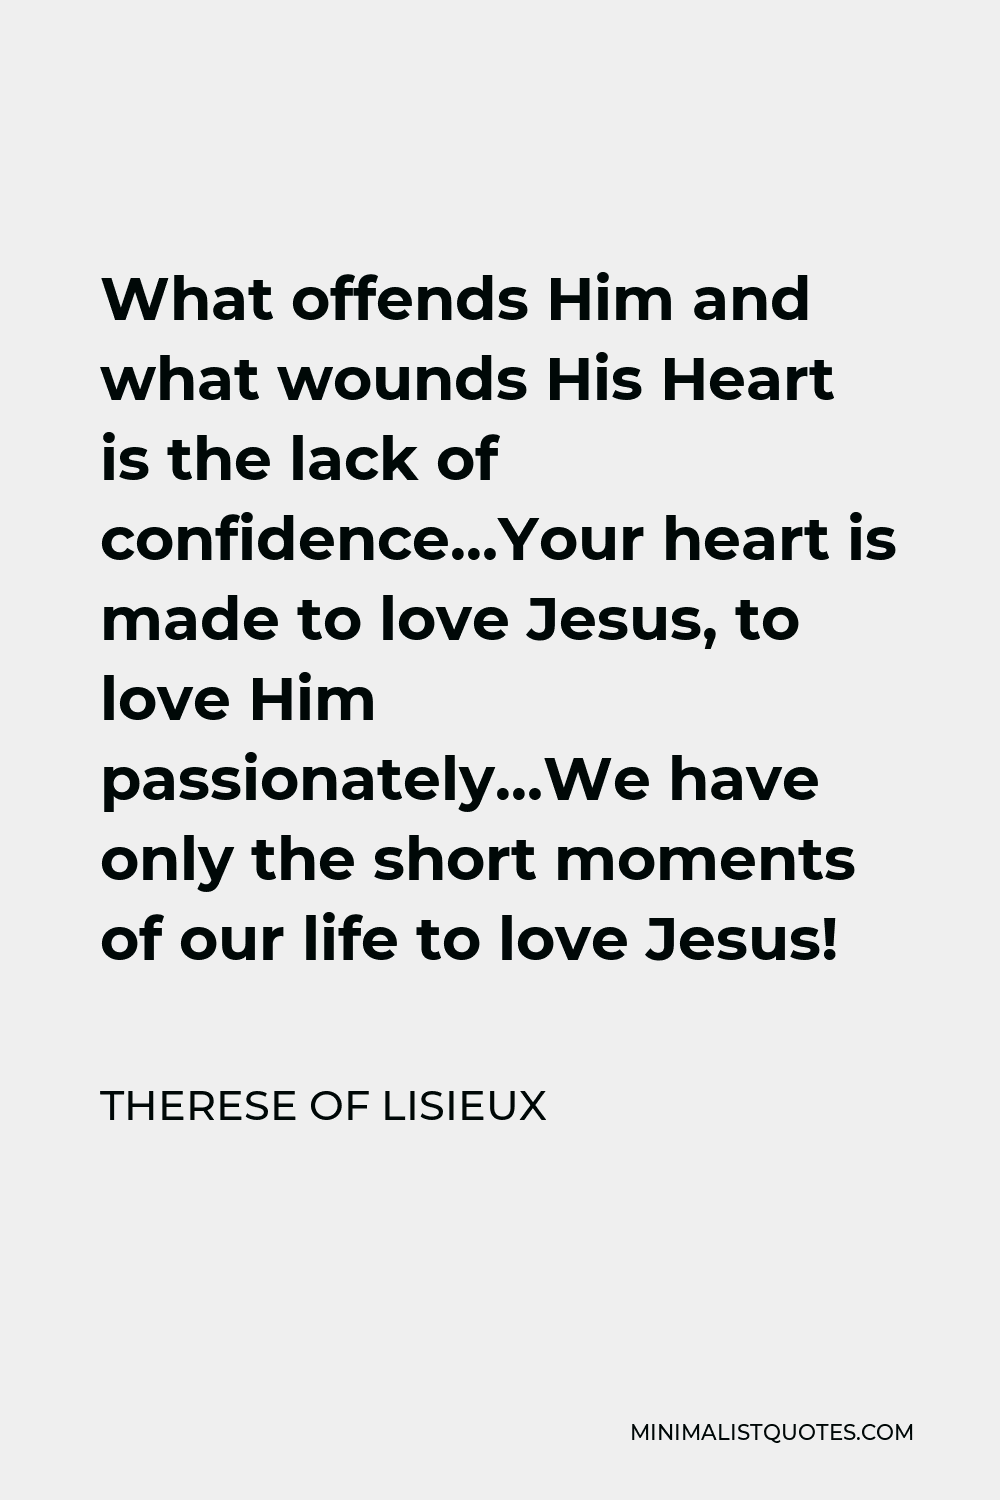 Therese of Lisieux Quote - What offends Him and what wounds His Heart is the lack of confidence…Your heart is made to love Jesus, to love Him passionately…We have only the short moments of our life to love Jesus!